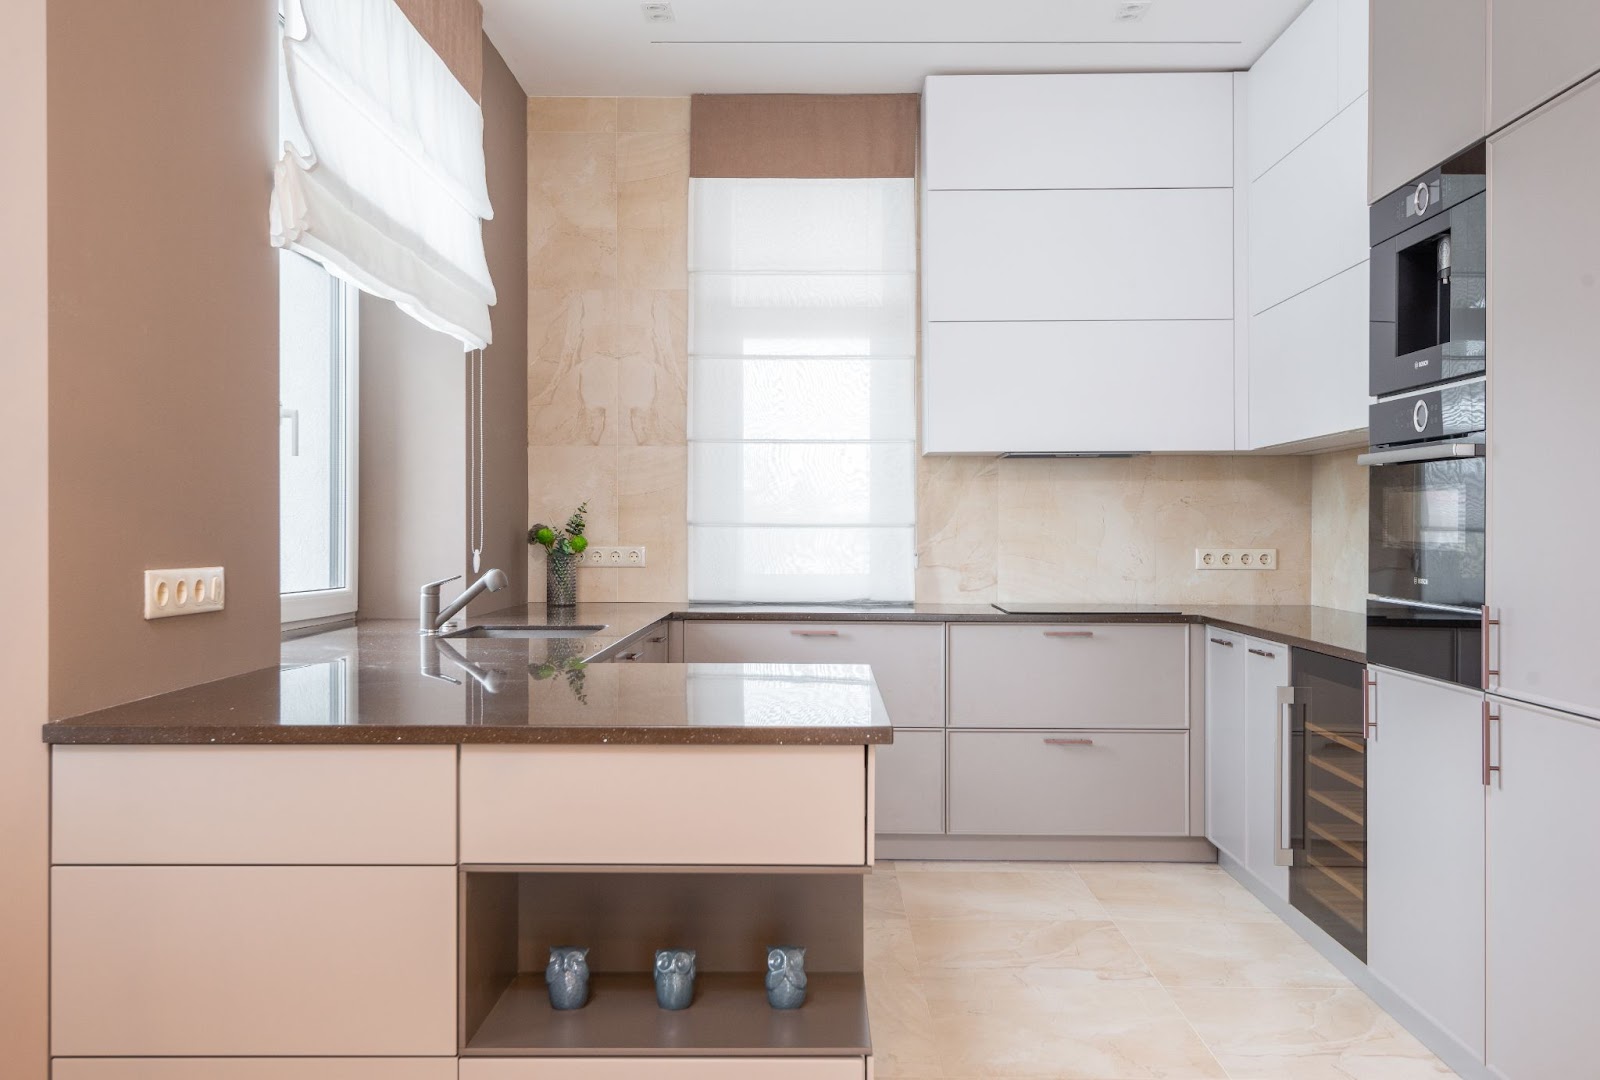 Kitchen Cabinet Cost In Singapore